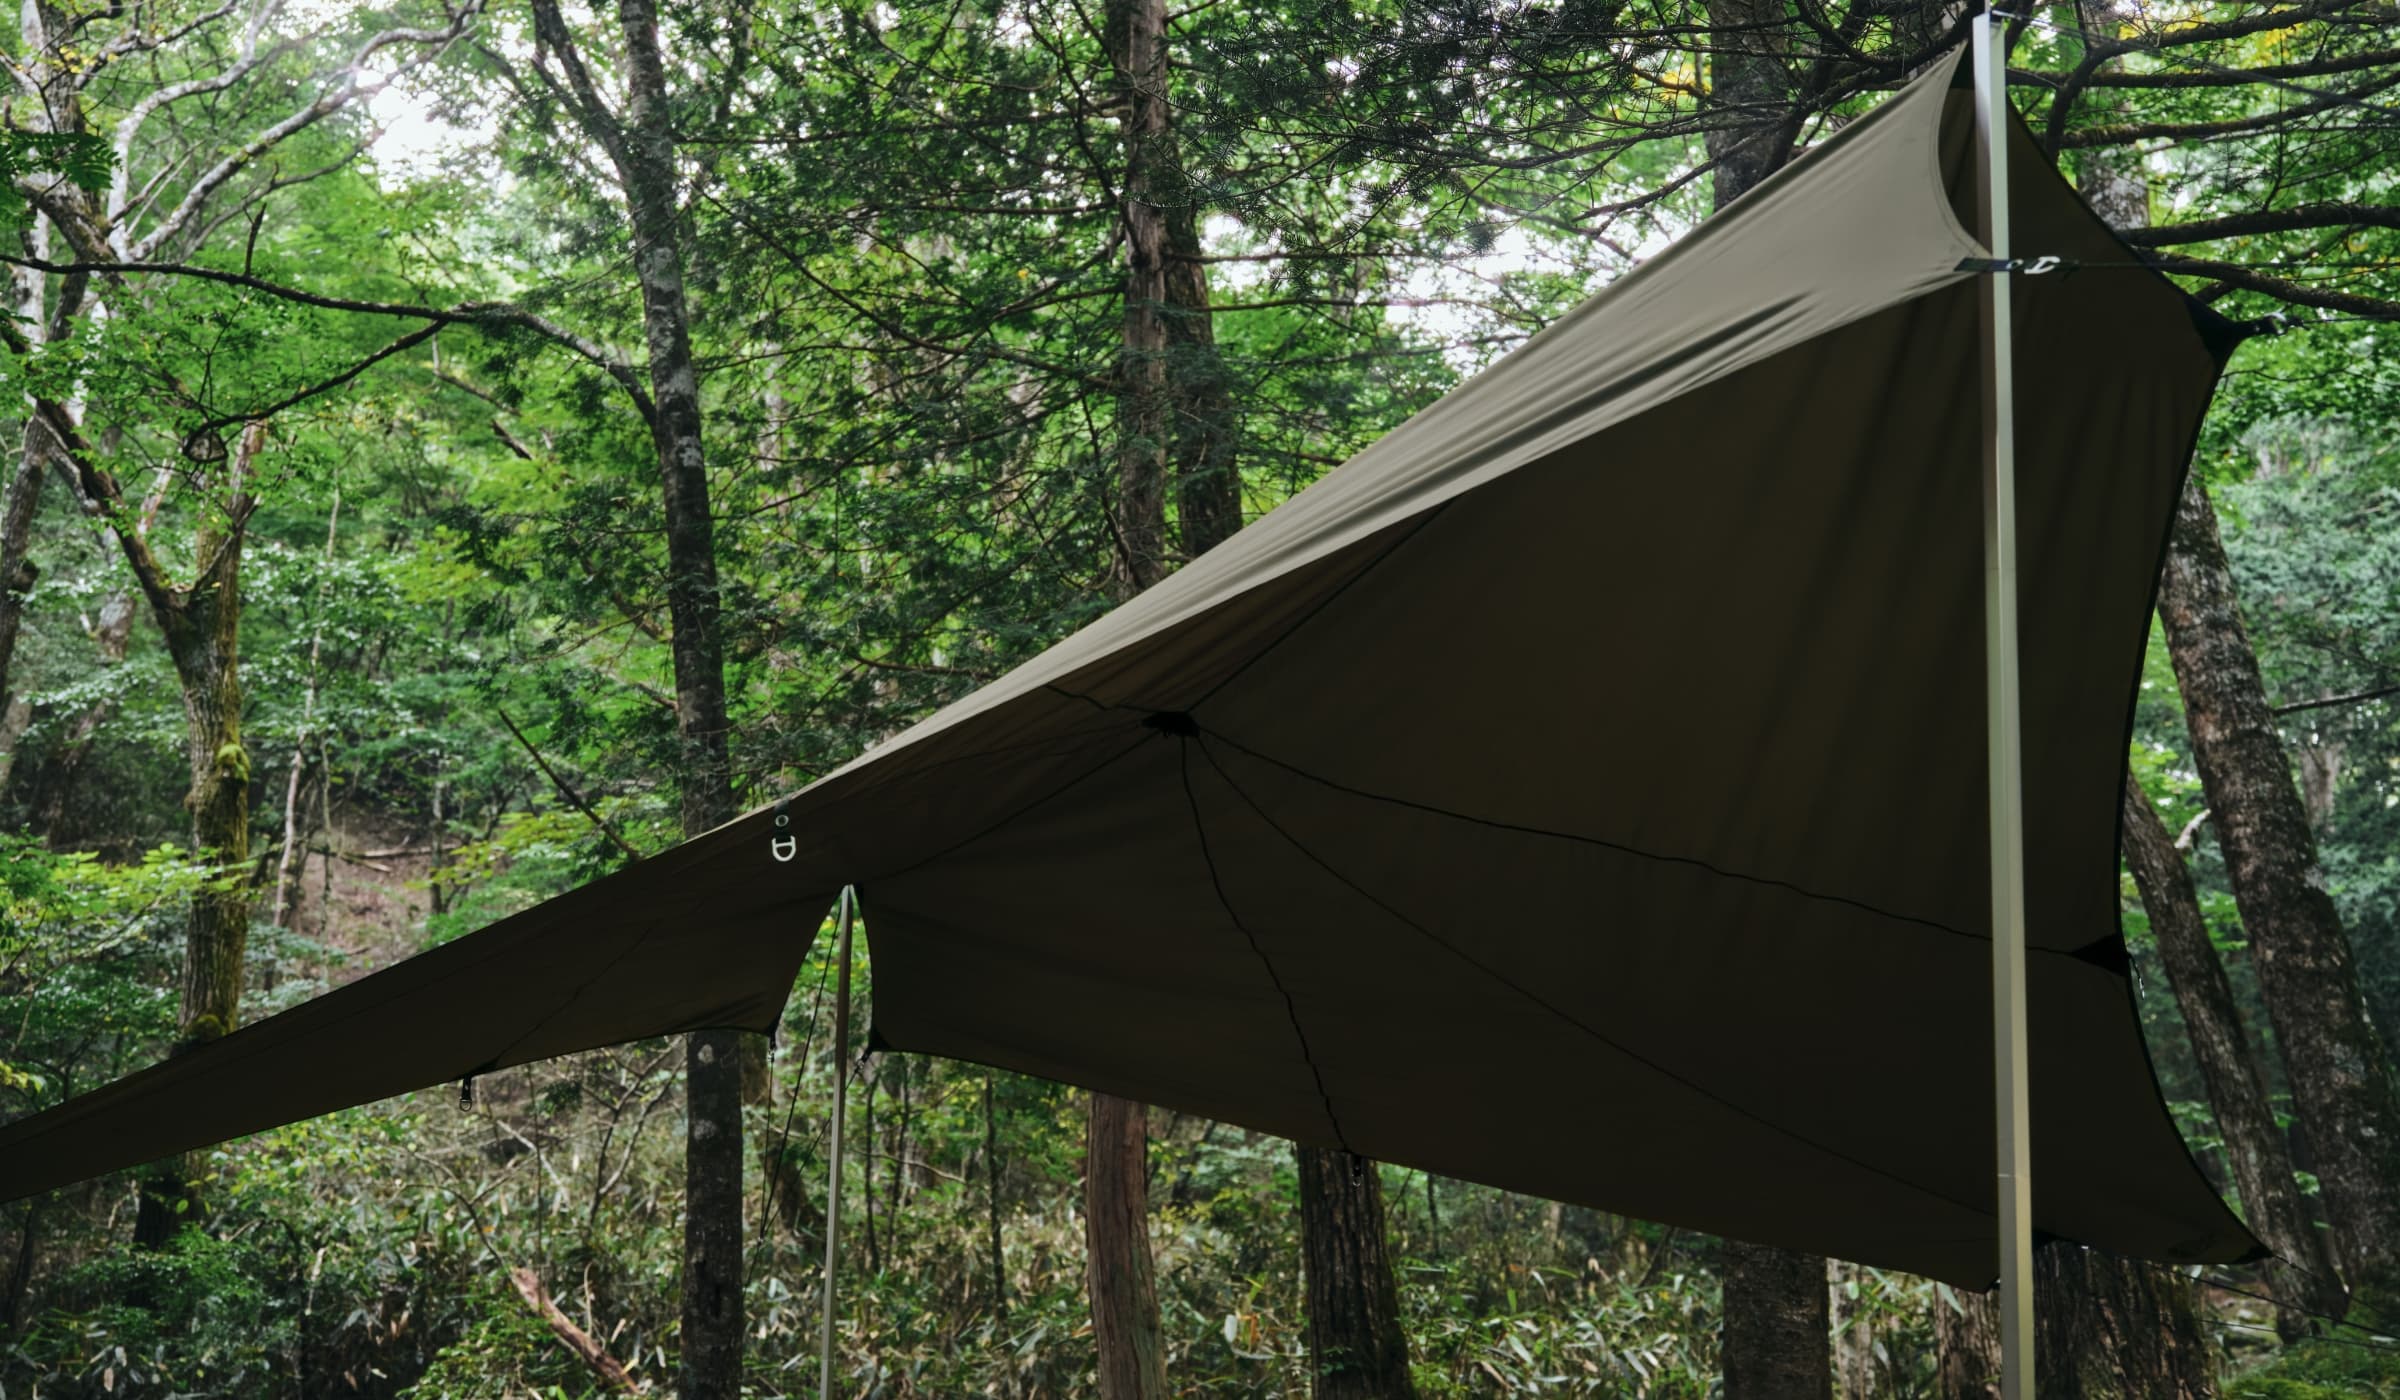 Nebula Tarp 6 | Online Camp Store | THE NORTH FACE CAMP